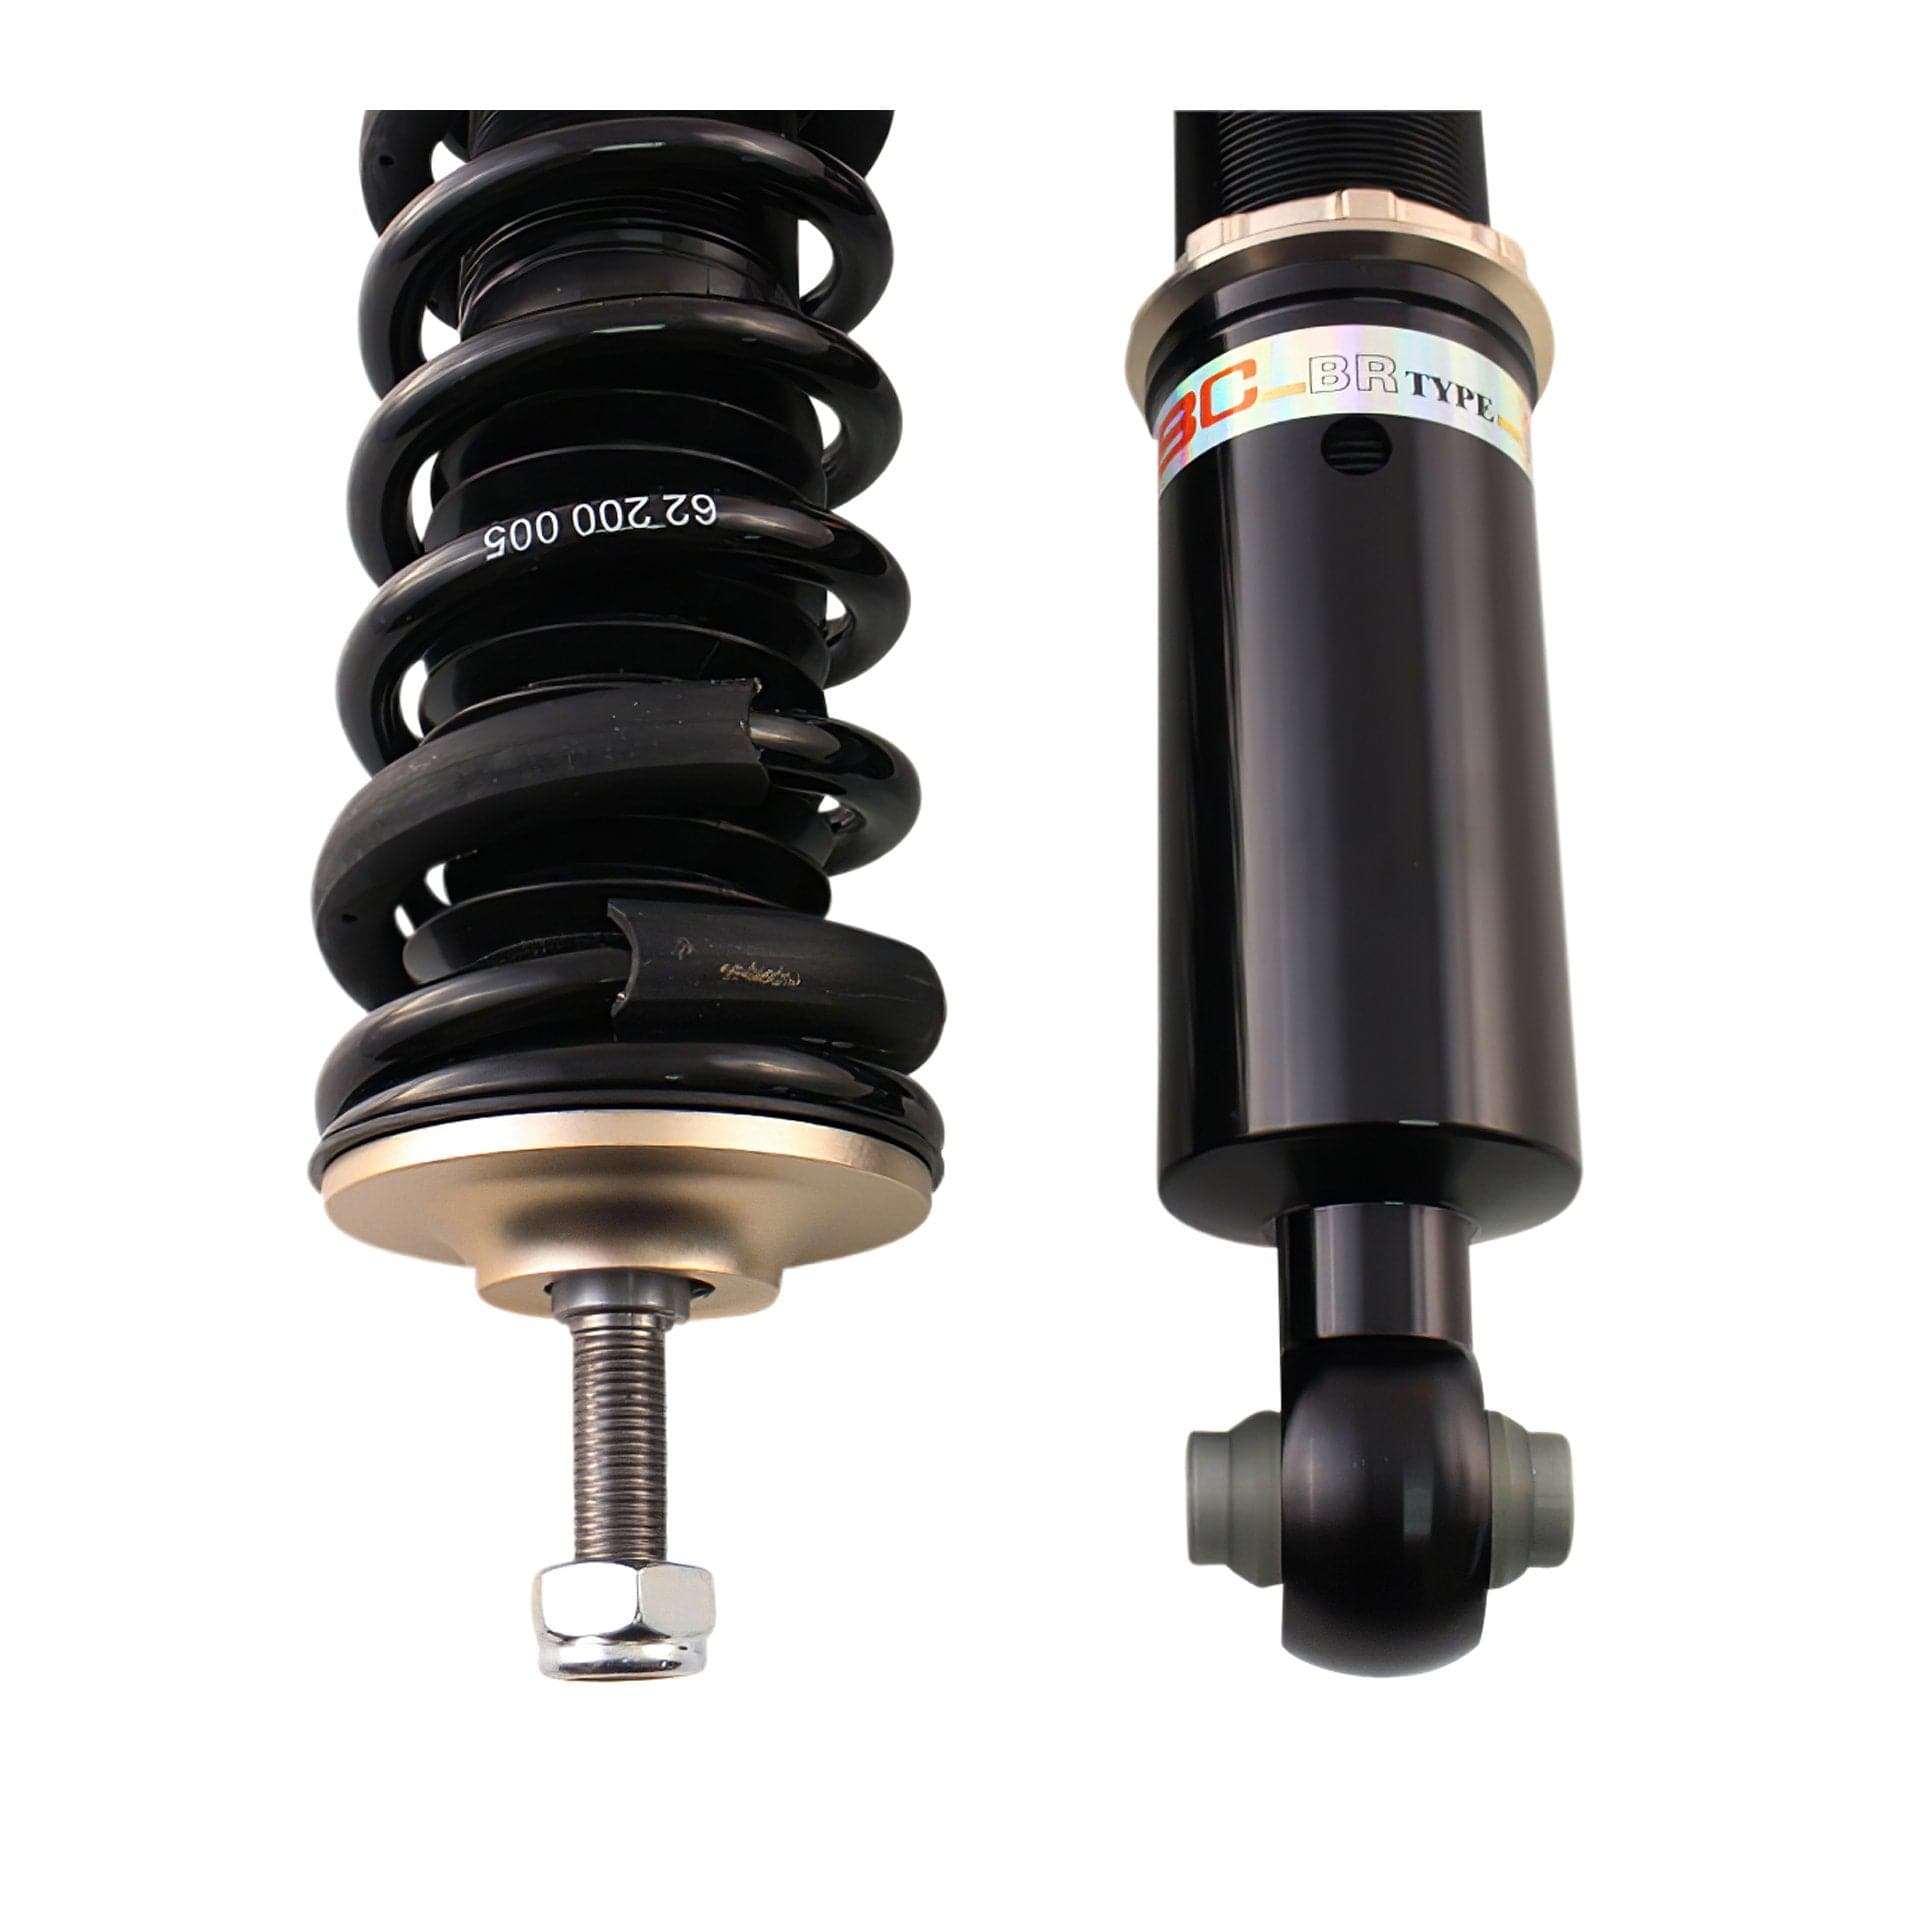 BC Racing BR Coilovers for 85-99 VOLKSWAGEN GOLF/JETTA